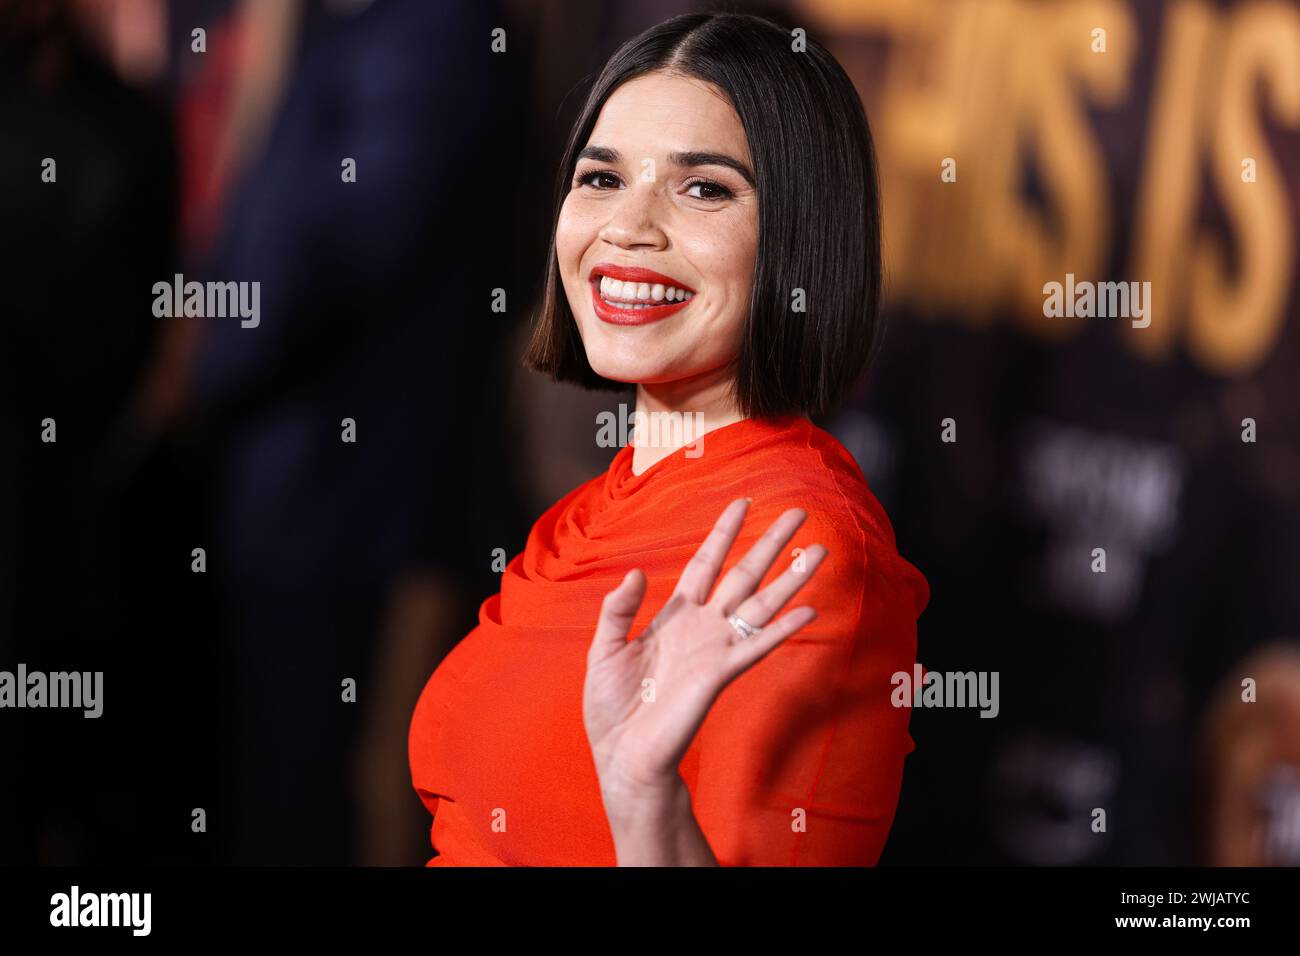 HOLLYWOOD, LOS ANGELES, KALIFORNIEN, USA - 13. FEBRUAR: America Ferrera kommt zur Los Angeles Premiere von Amazon MGM Studios' This Is Me... Now: A Love Story', die am 13. Februar 2024 im Dolby Theatre in Hollywood, Los Angeles, Kalifornien, USA stattfindet. (Foto: Xavier Collin/Image Press Agency) Stockfoto